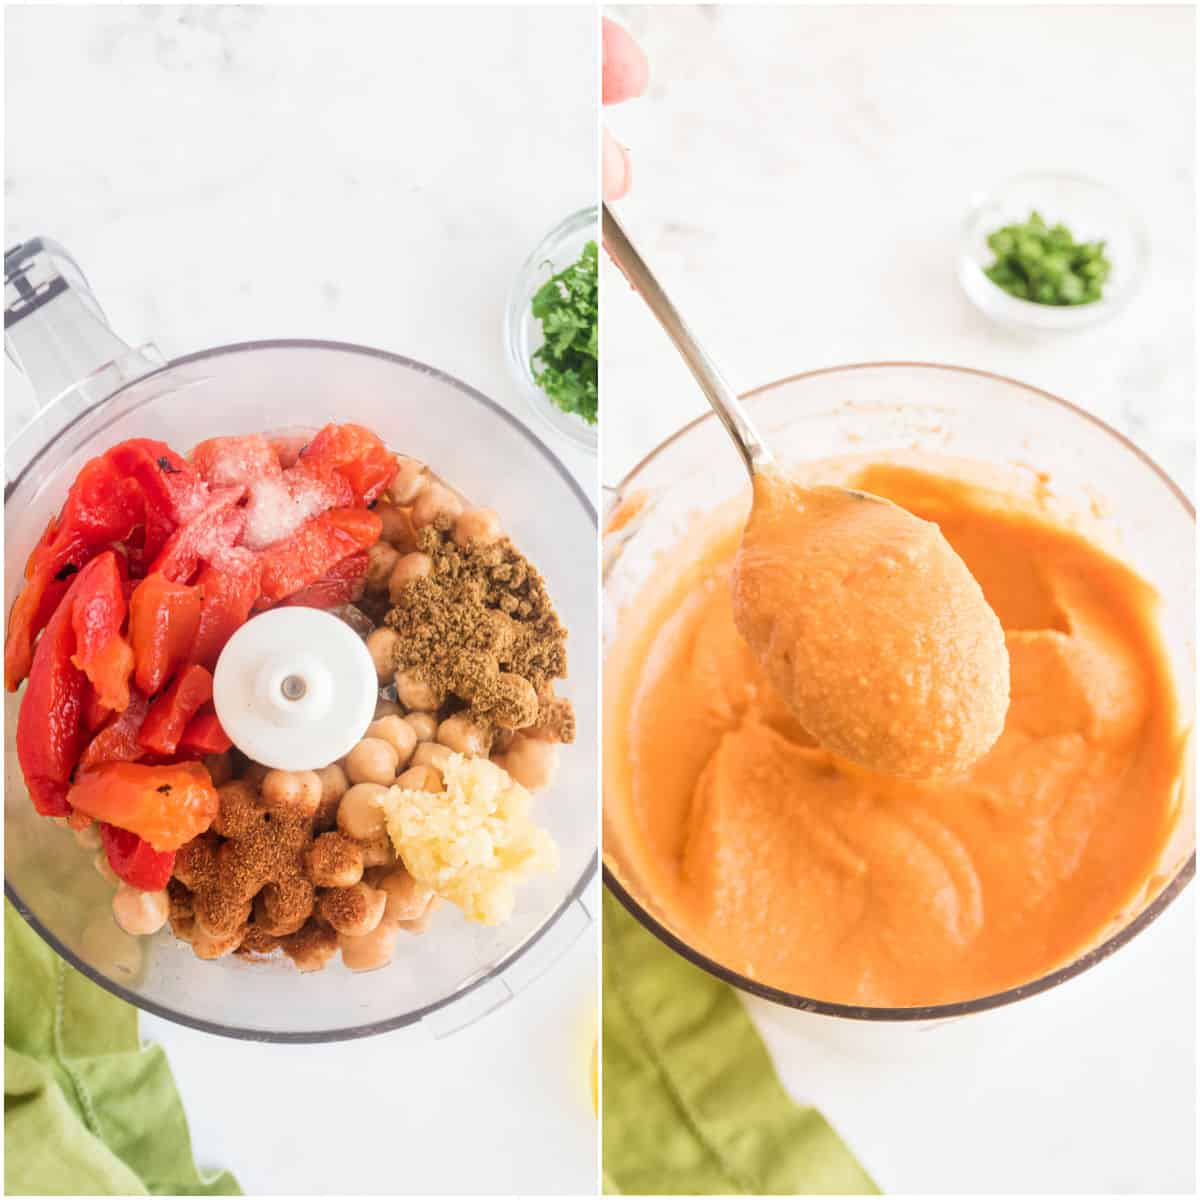 Step by step photos showing how to make roasted red pepper hummus.